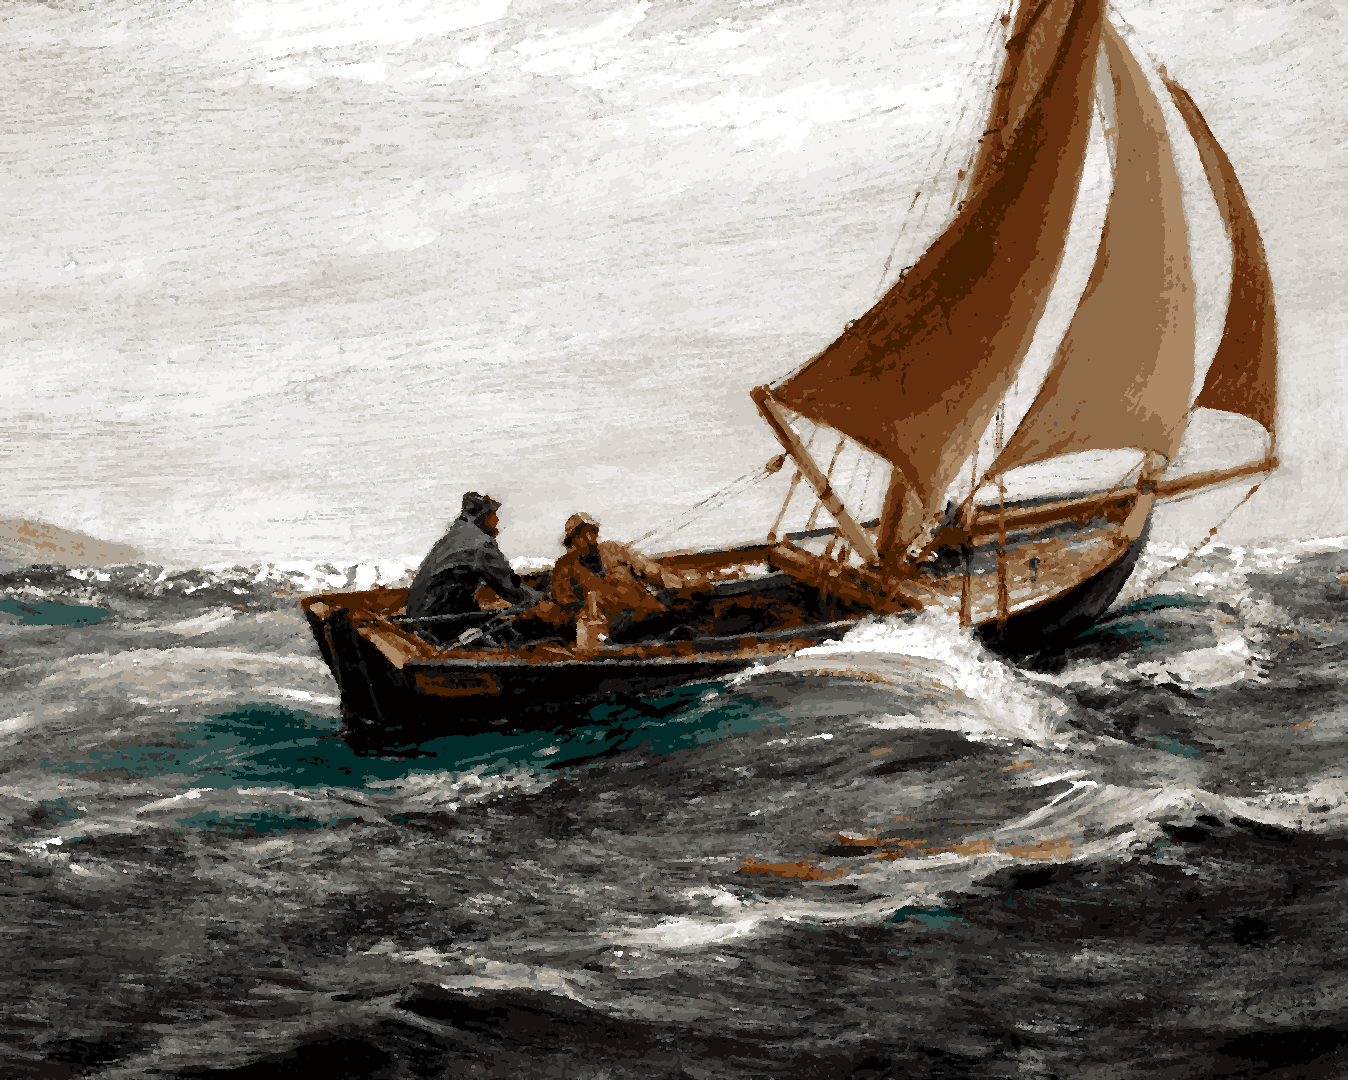 With Wind And Tide by Charles Napier Hemy - Van-Go Paint-By-Number Kit